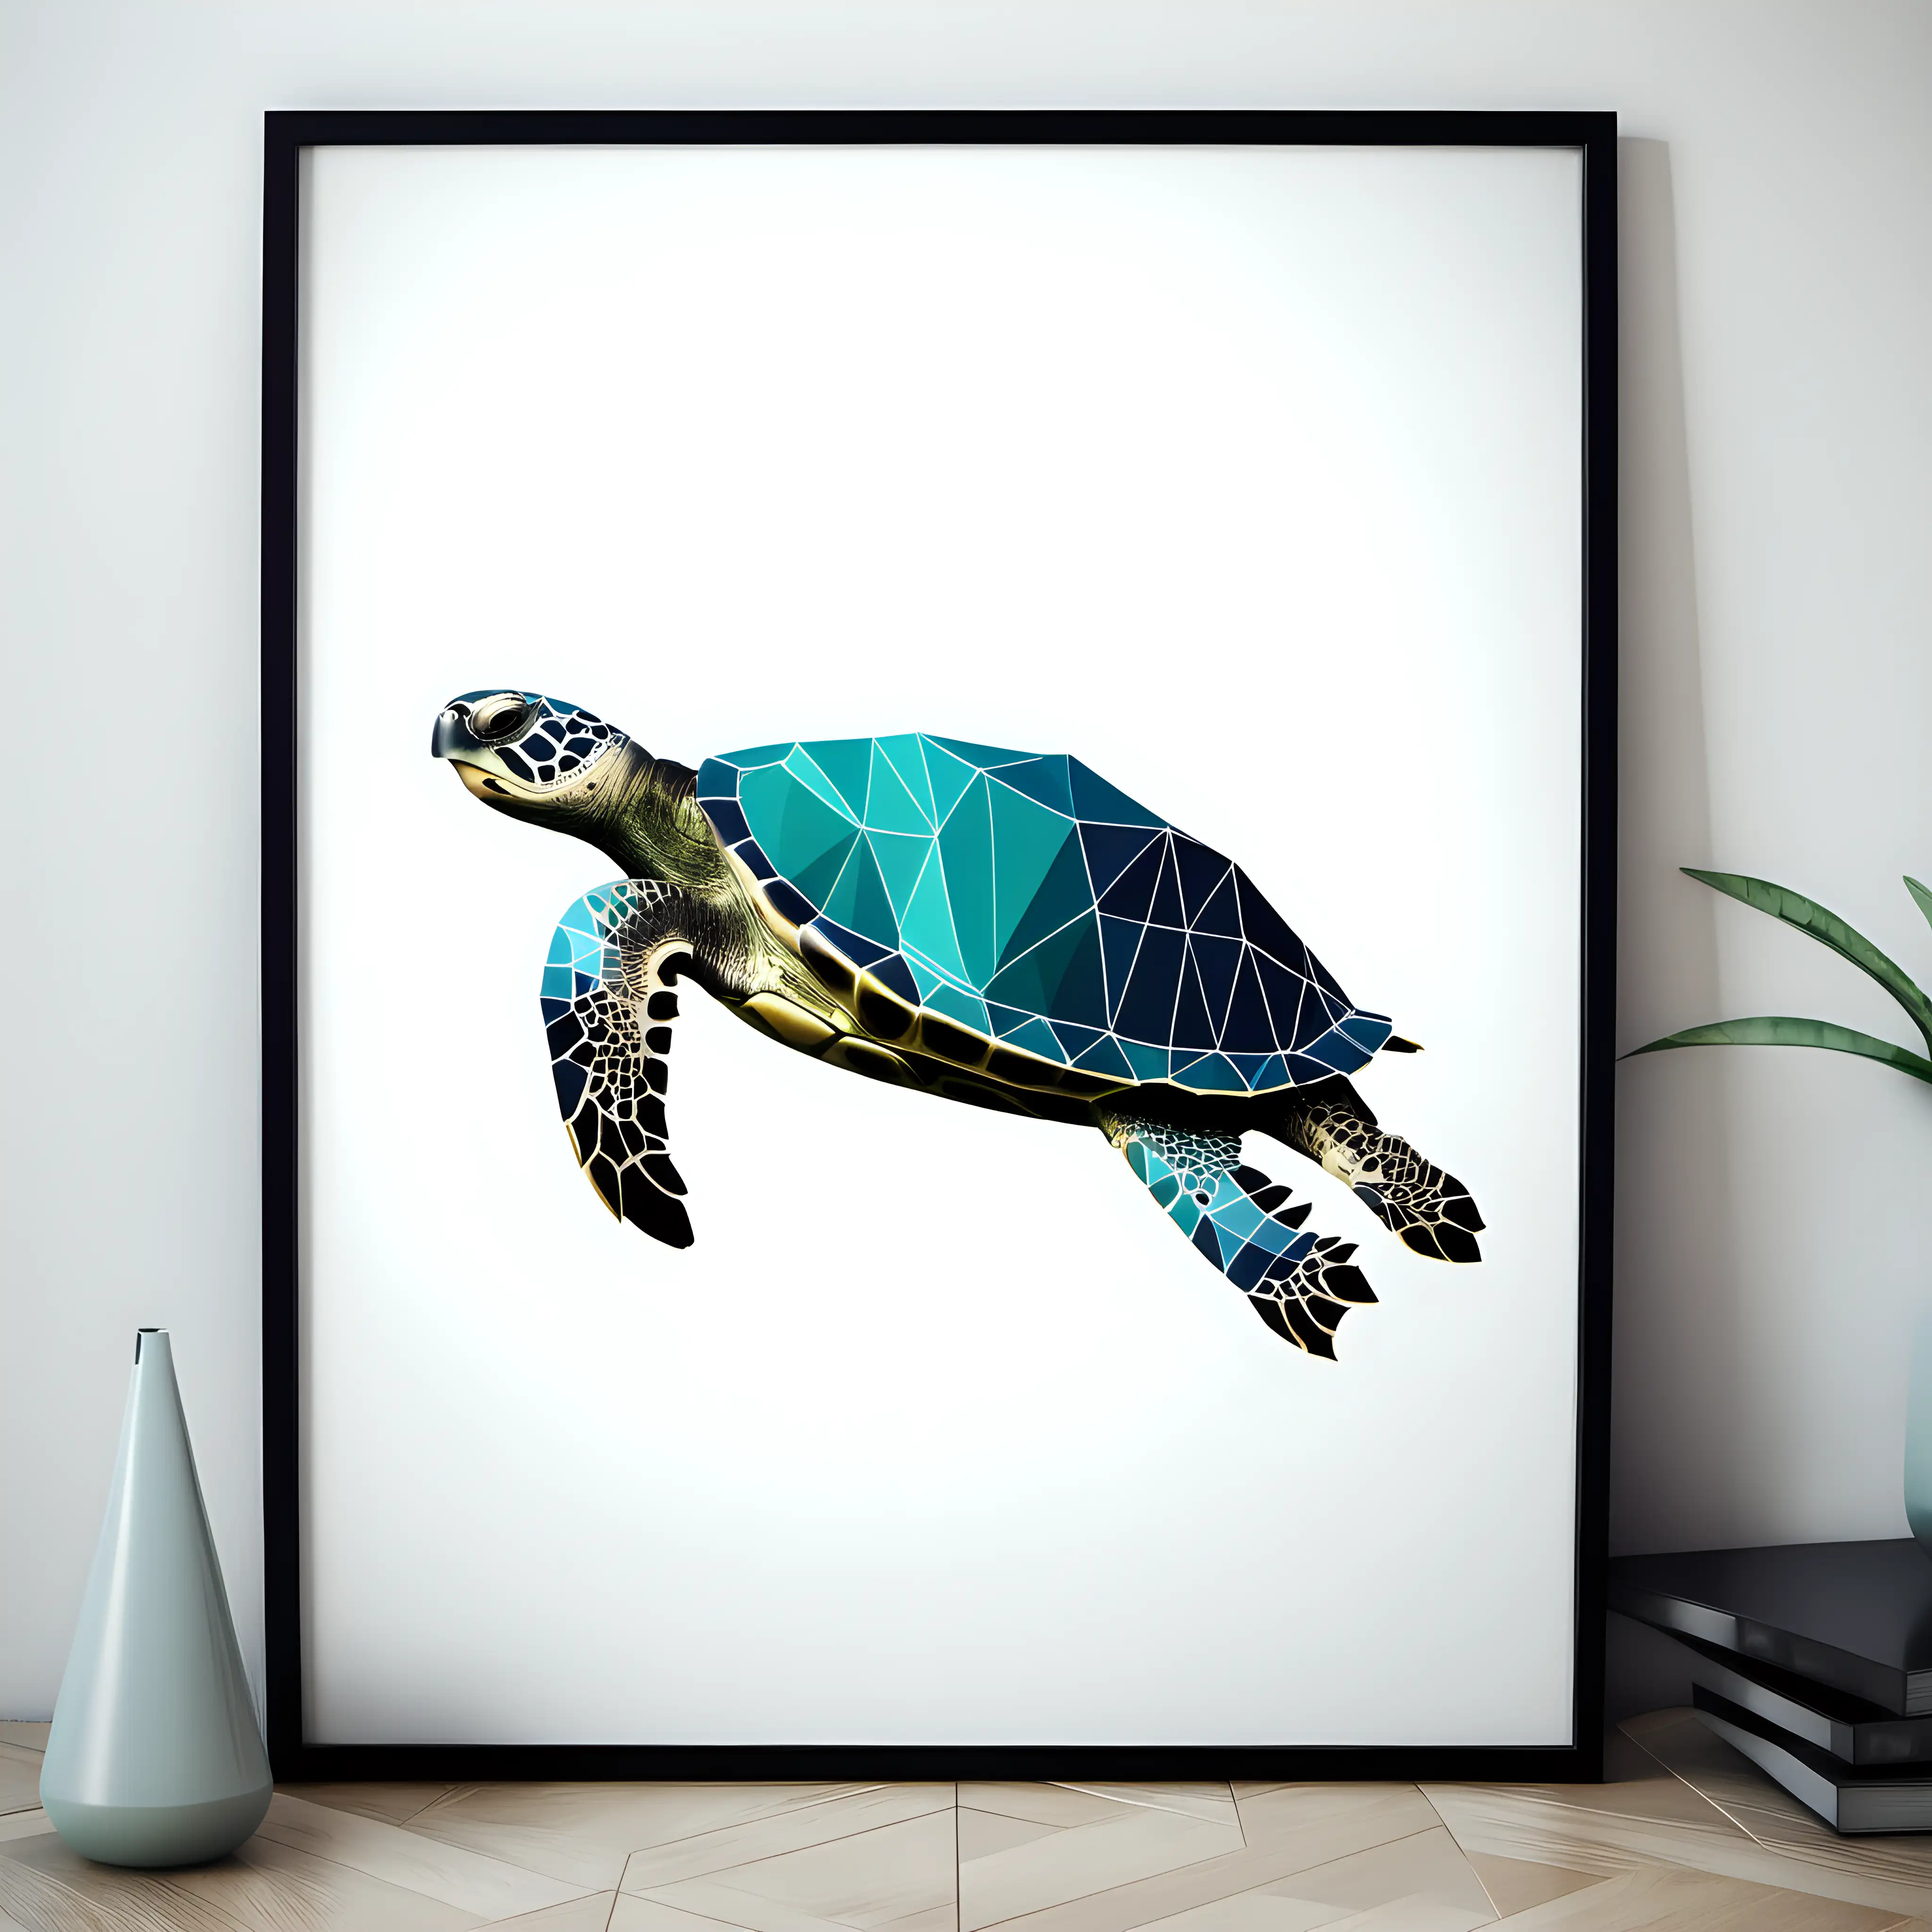 Abstract Geometric Turtle Art Poster for Modern Interior Decor